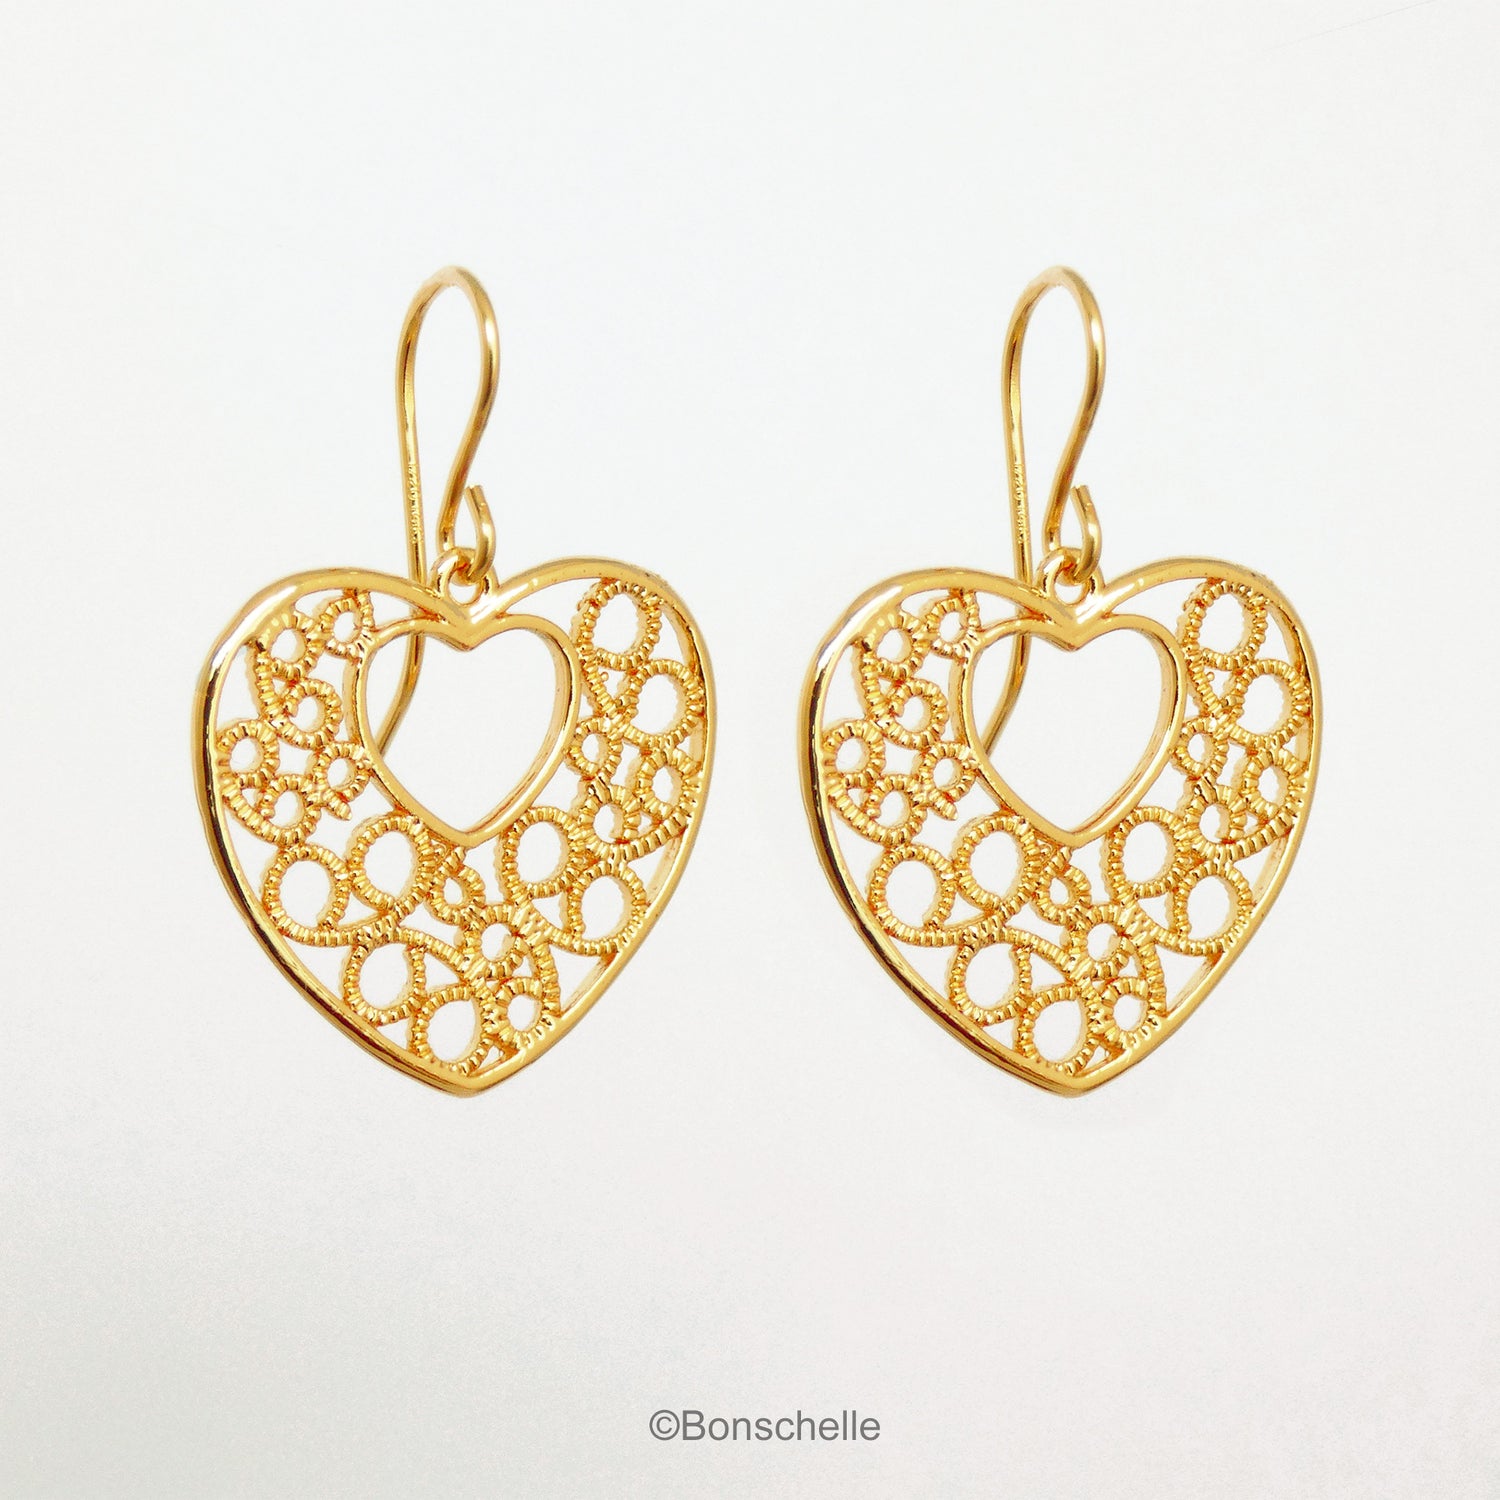 Bonschelle hearts and love collection with golden heart earrings